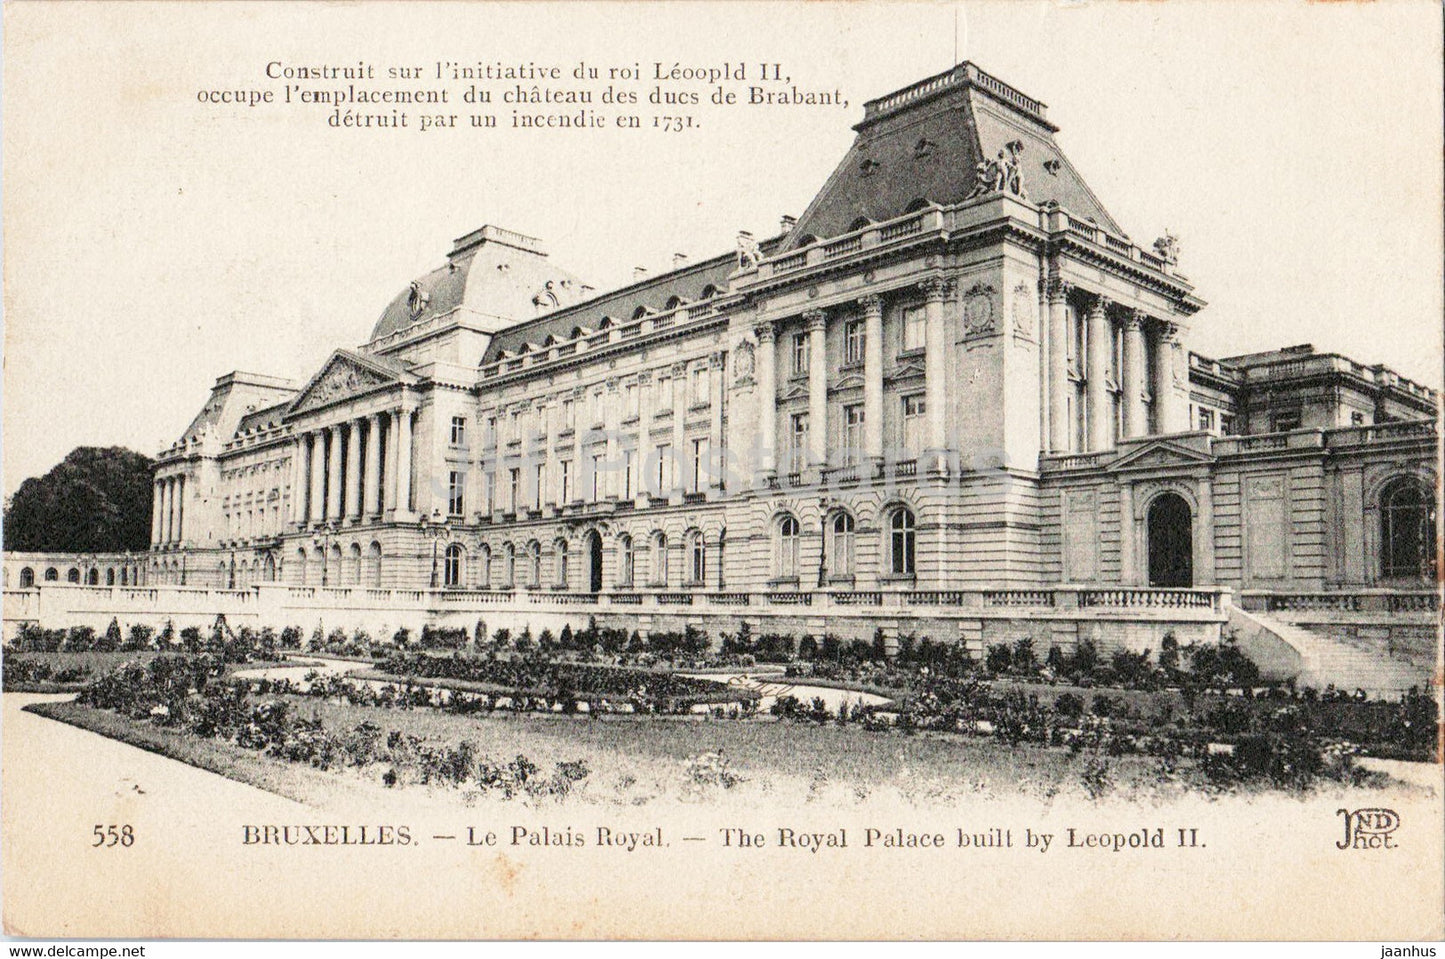 Bruxelles - Brussels - Le Palais Royal - The Royal Palace built by Leopold II - 558 old postcard - 1920 - Belgium - used - JH Postcards